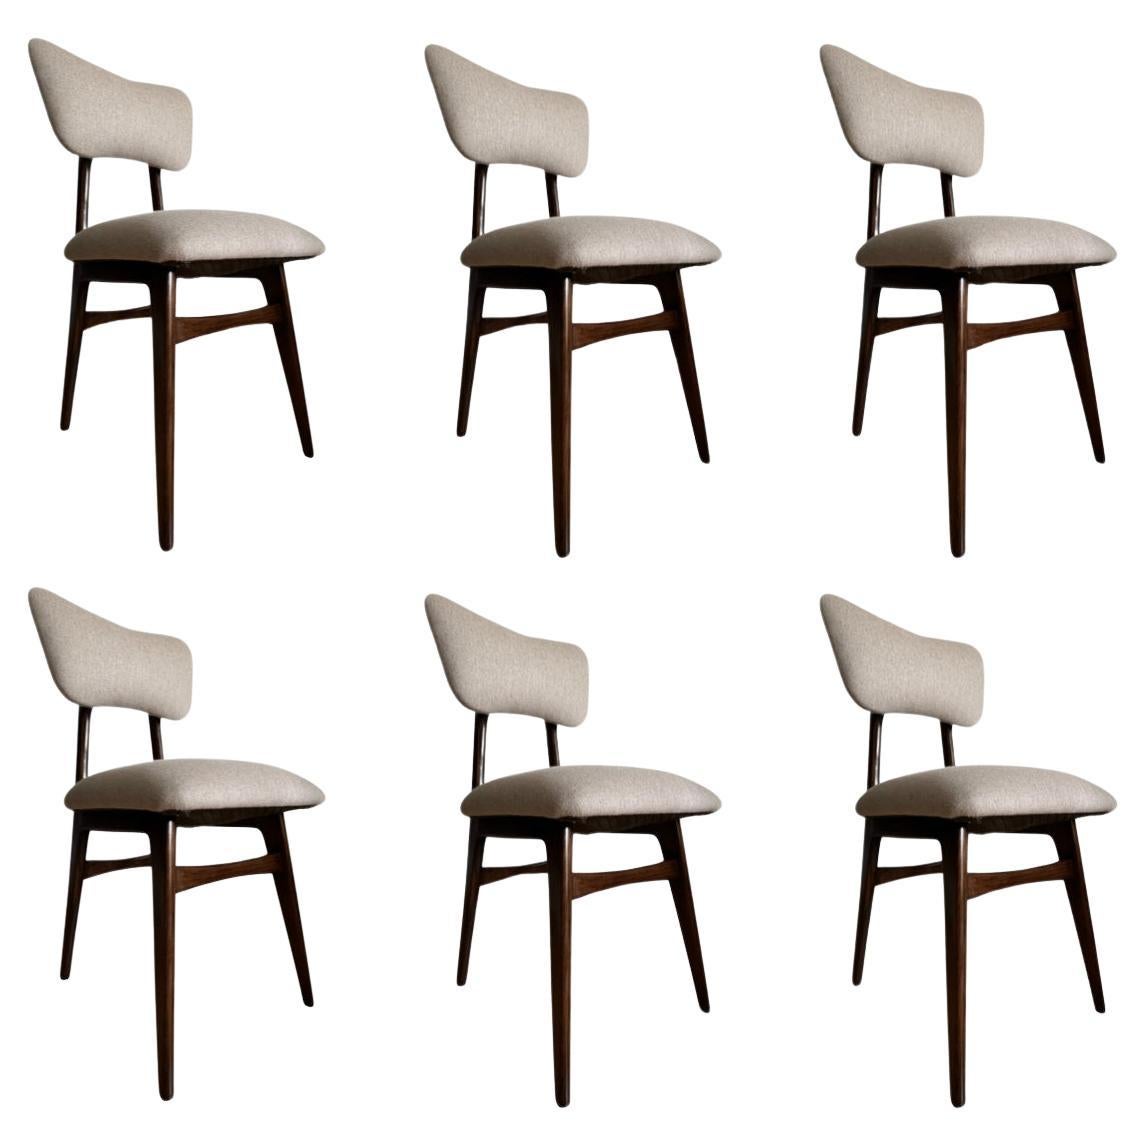 Set of 6 Midcentury Dining Chairs in Beige Wool Upholstery, Poland, 1960s